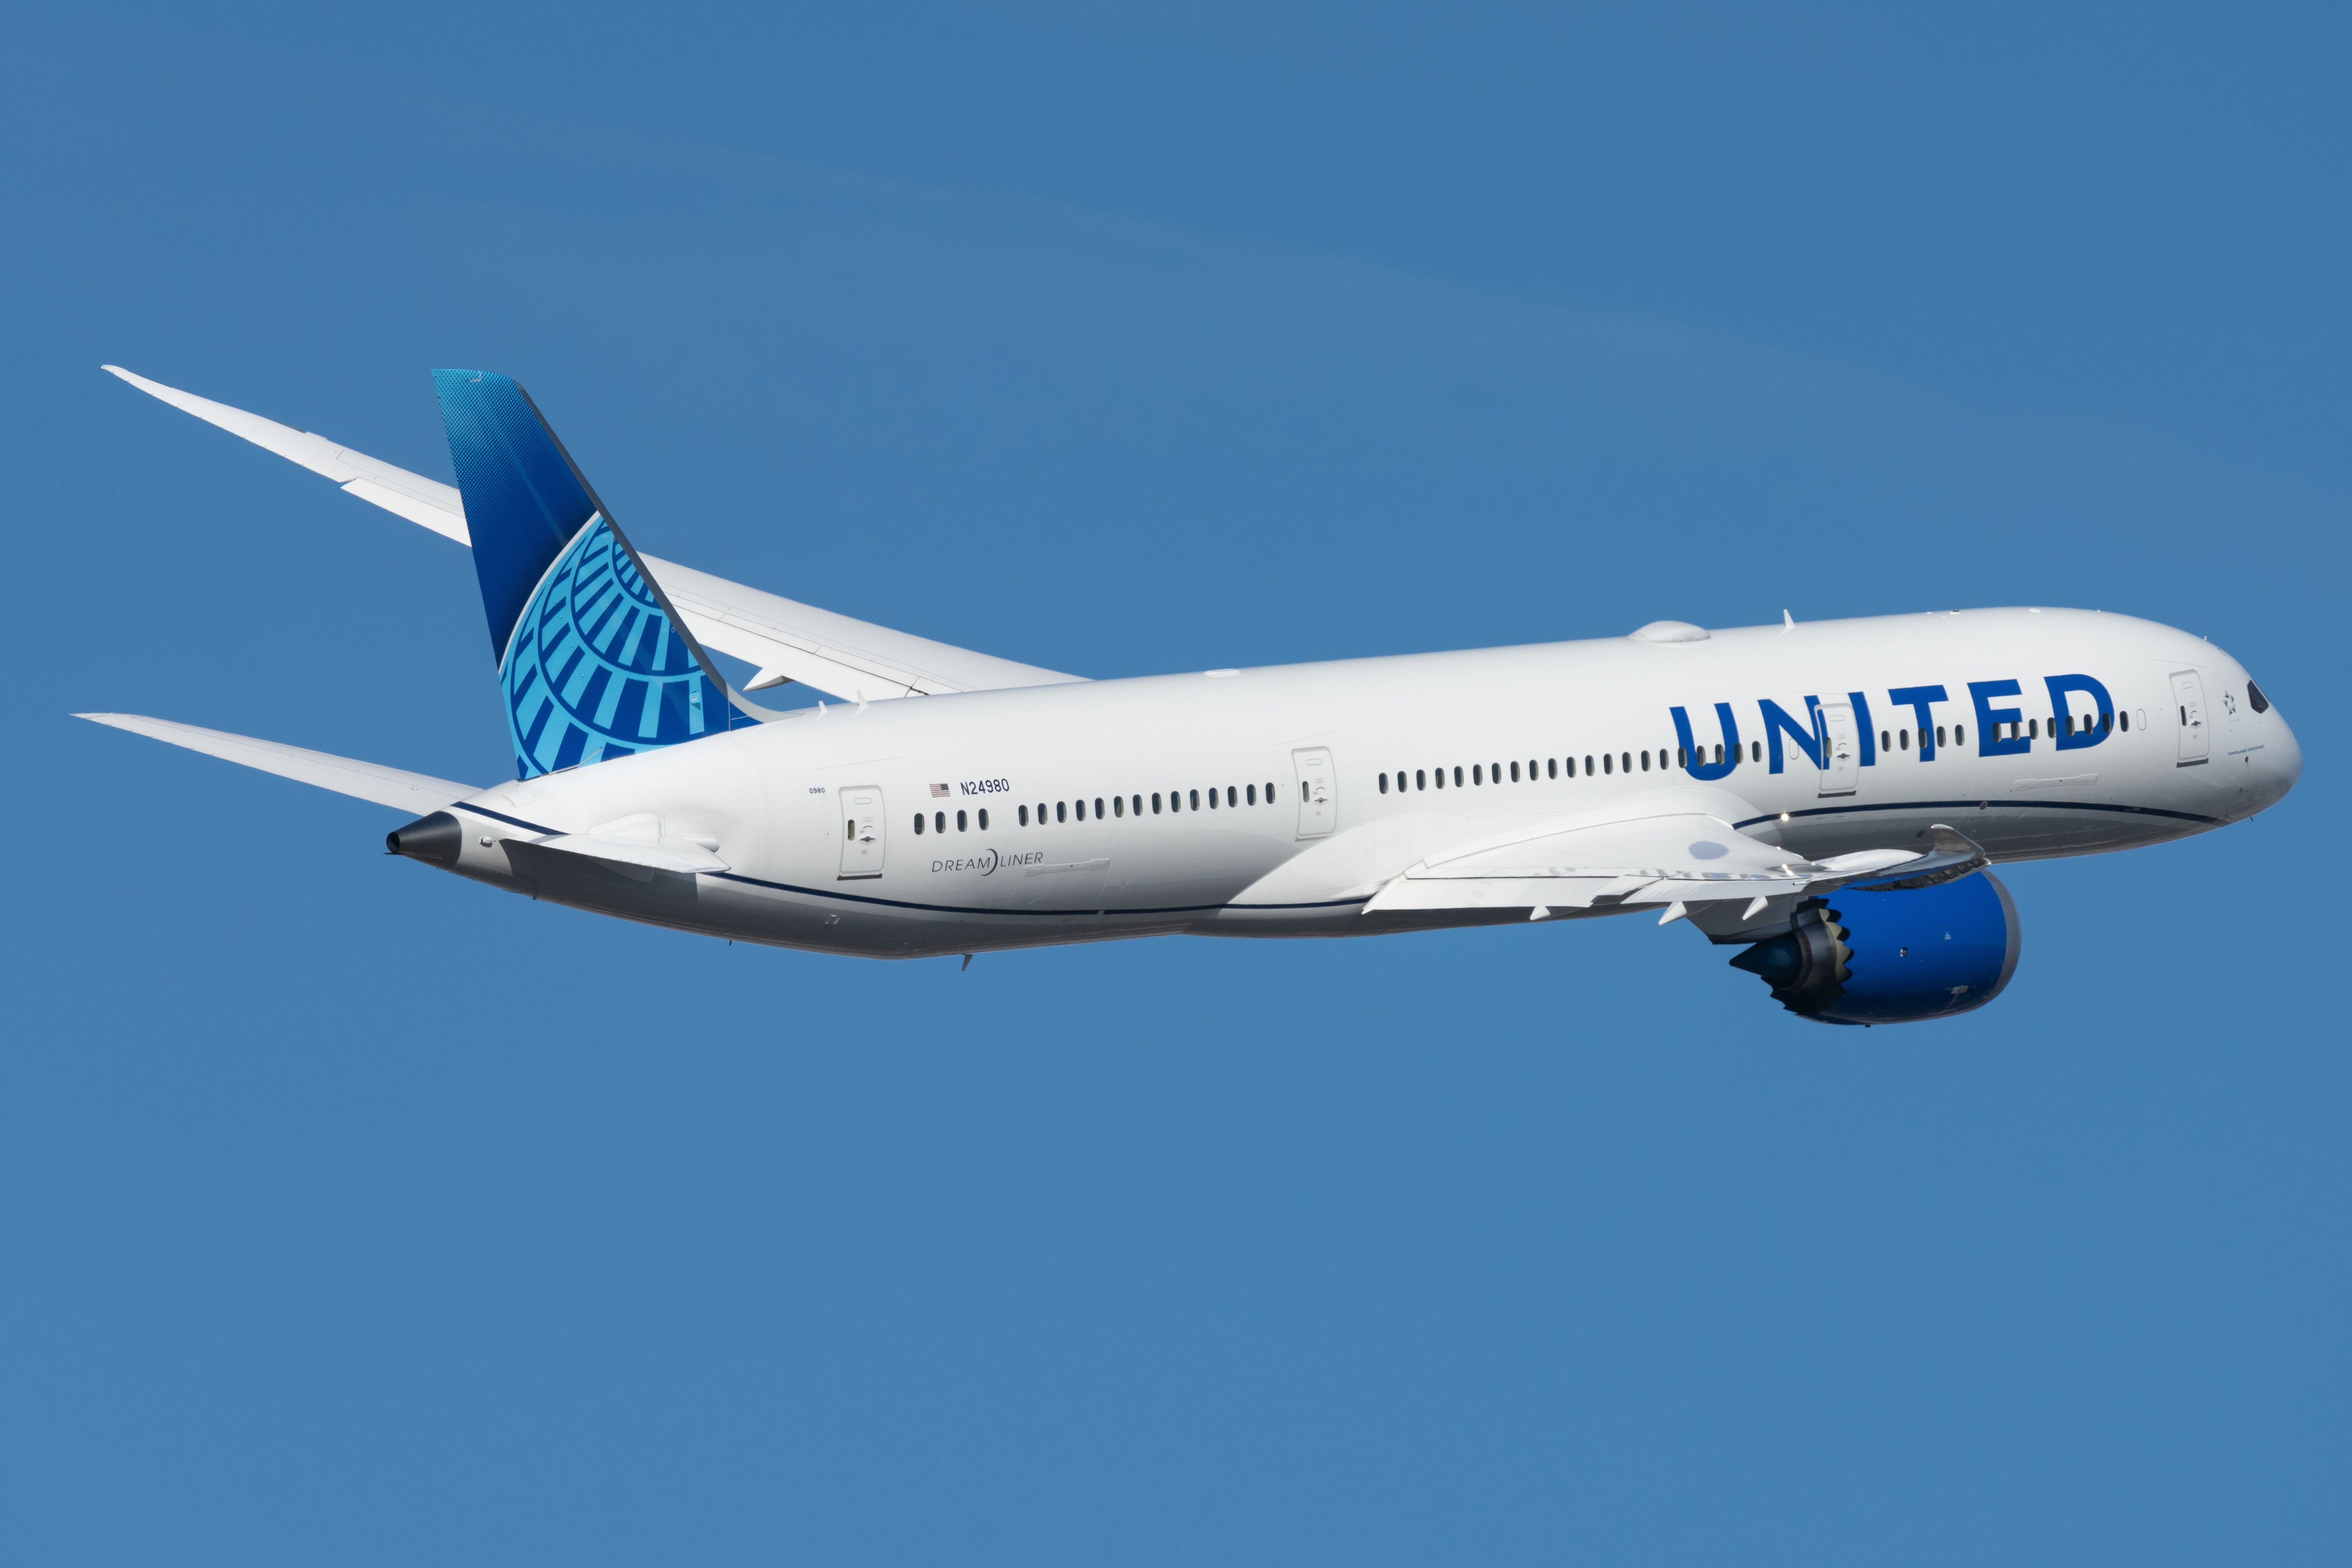 A United Airlines Boeing 787-9 Dreamliner Flying in the sky.